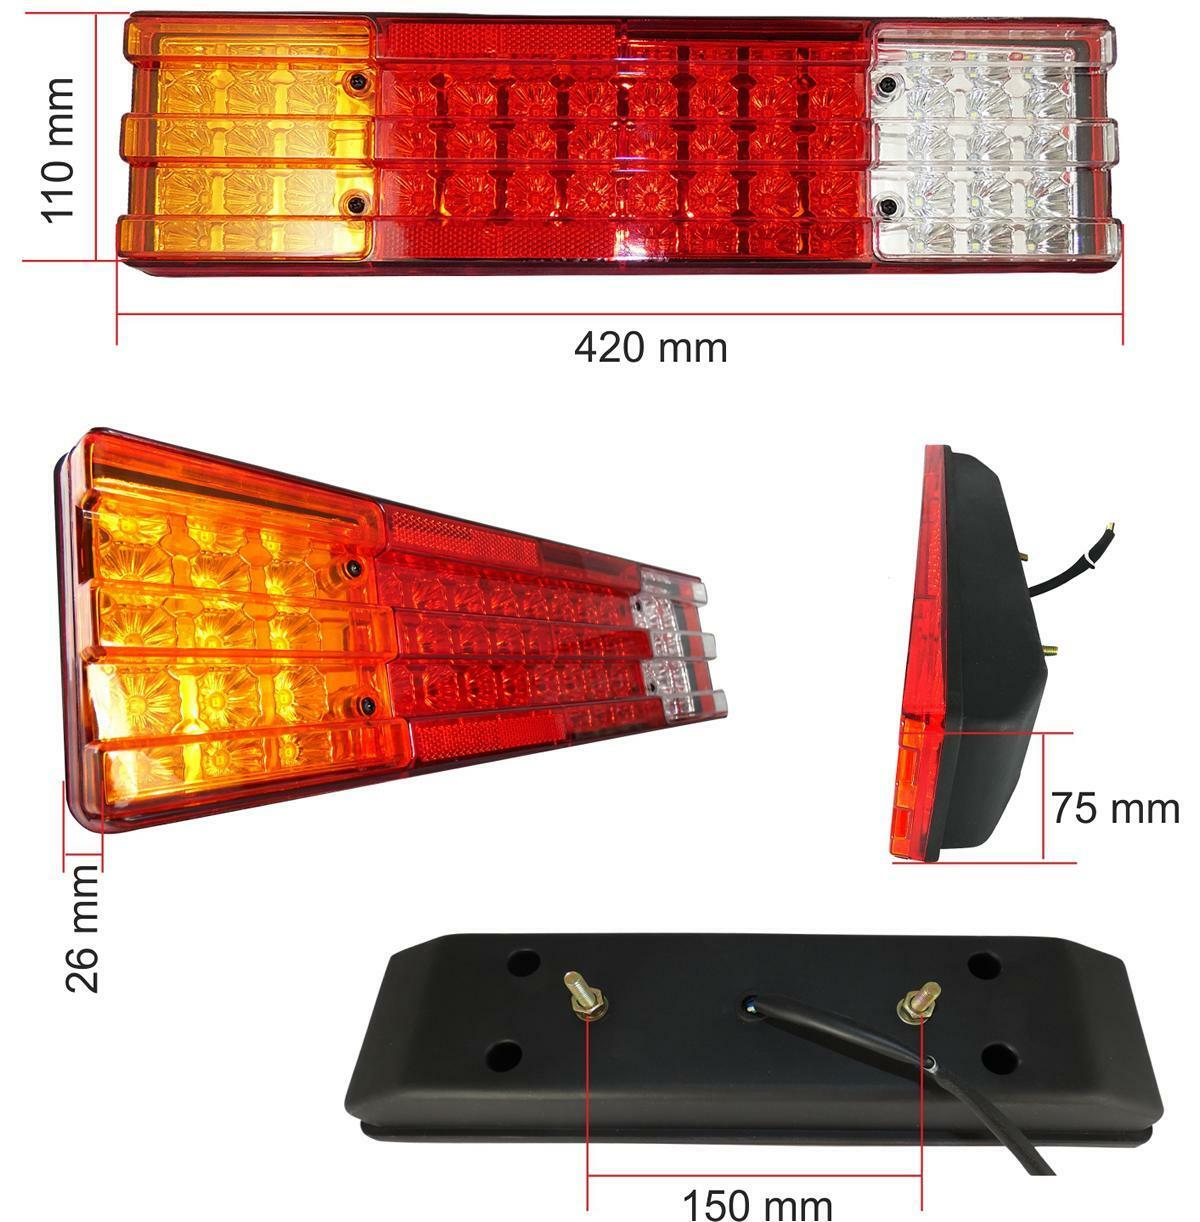 2 x 70 Led Tail Rear Stop lights truck trailer lorry caravan 6 functions 12v 